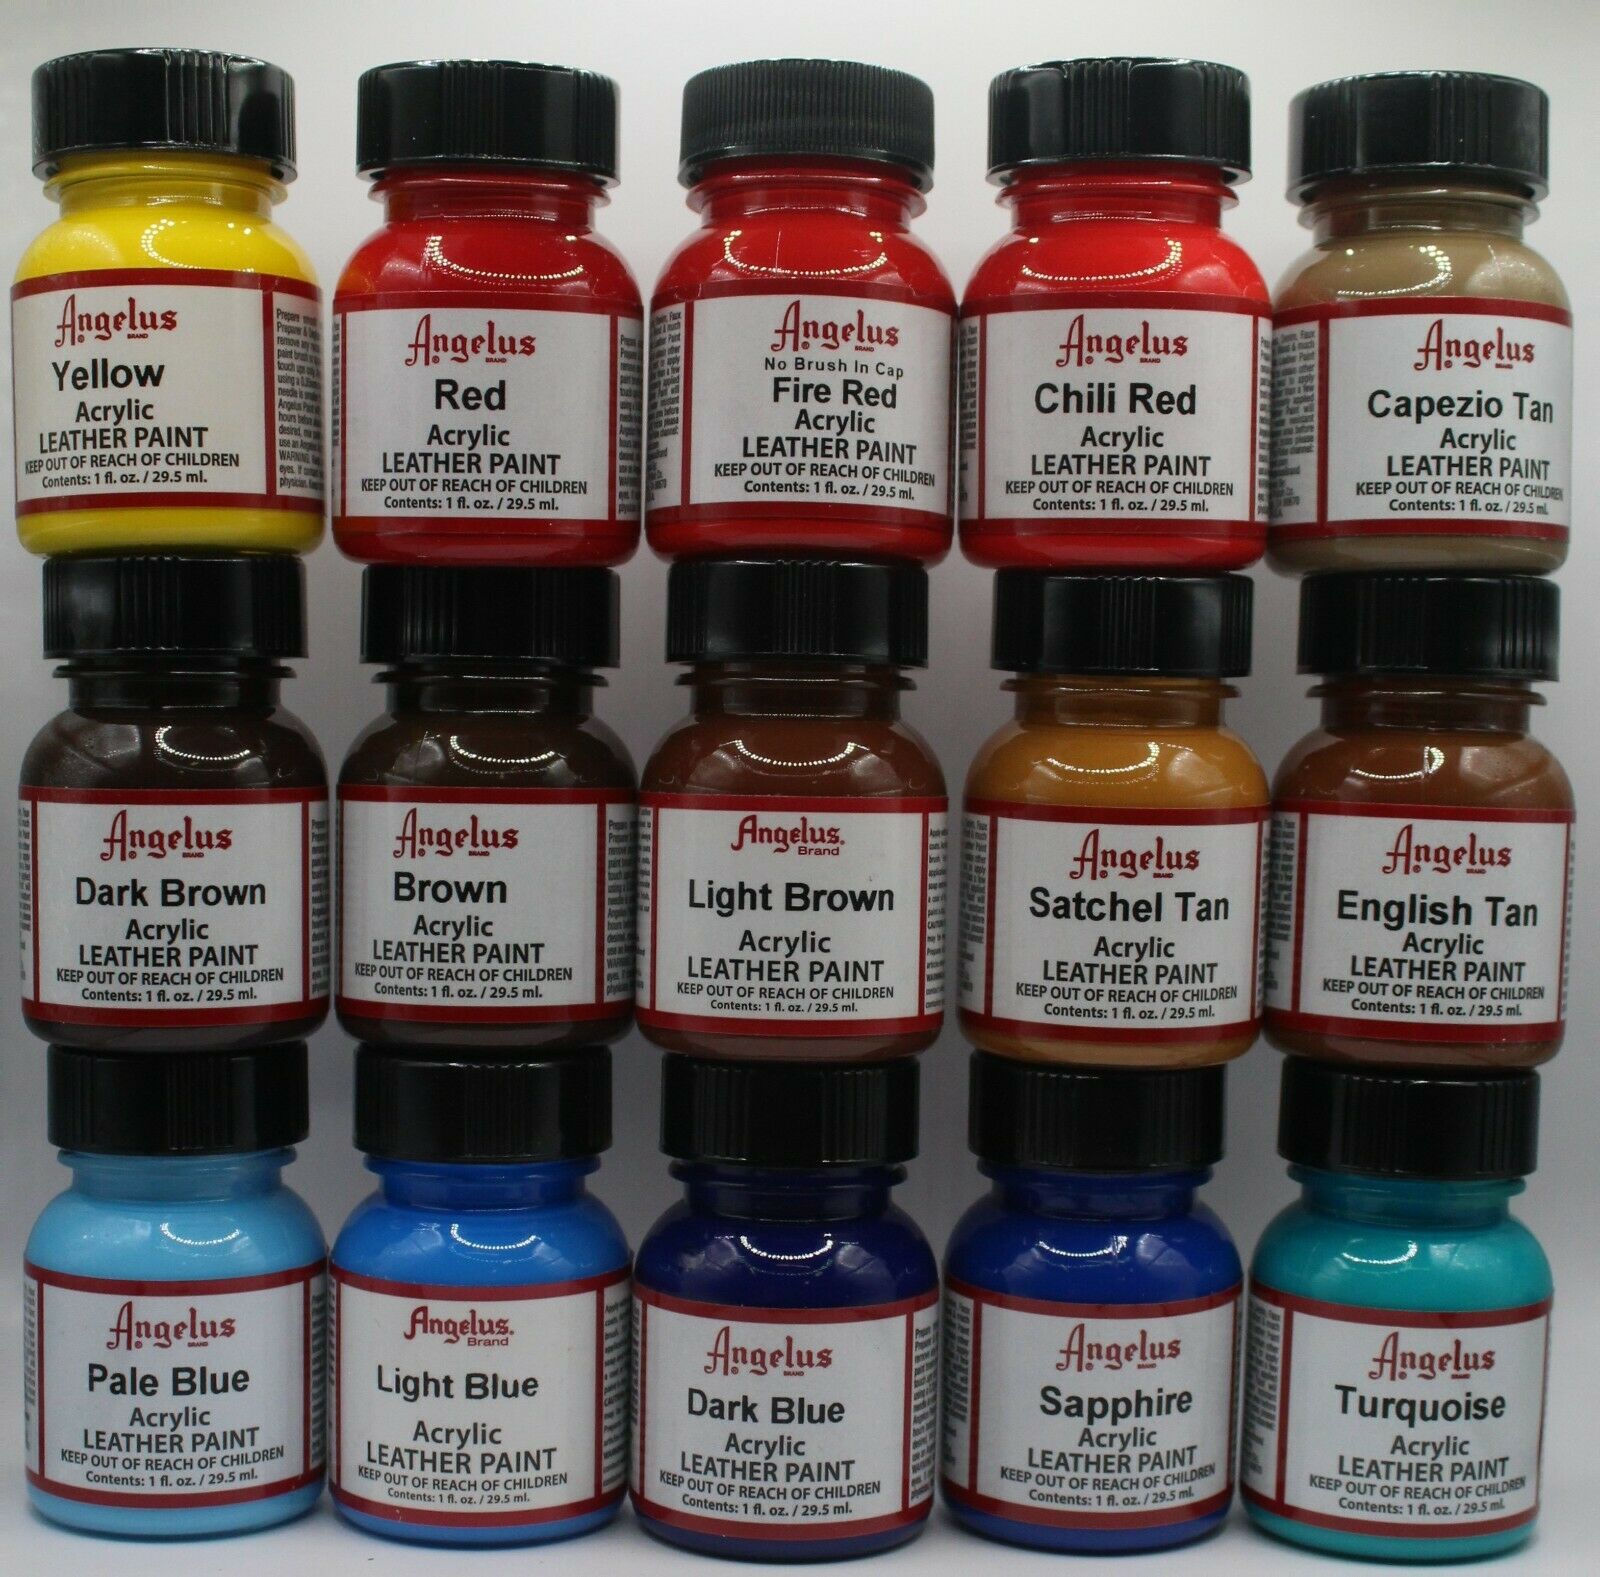 Angelus Acrylic Leather Paint Waterproof Sneaker Paint 1oz - 49 Colors Available